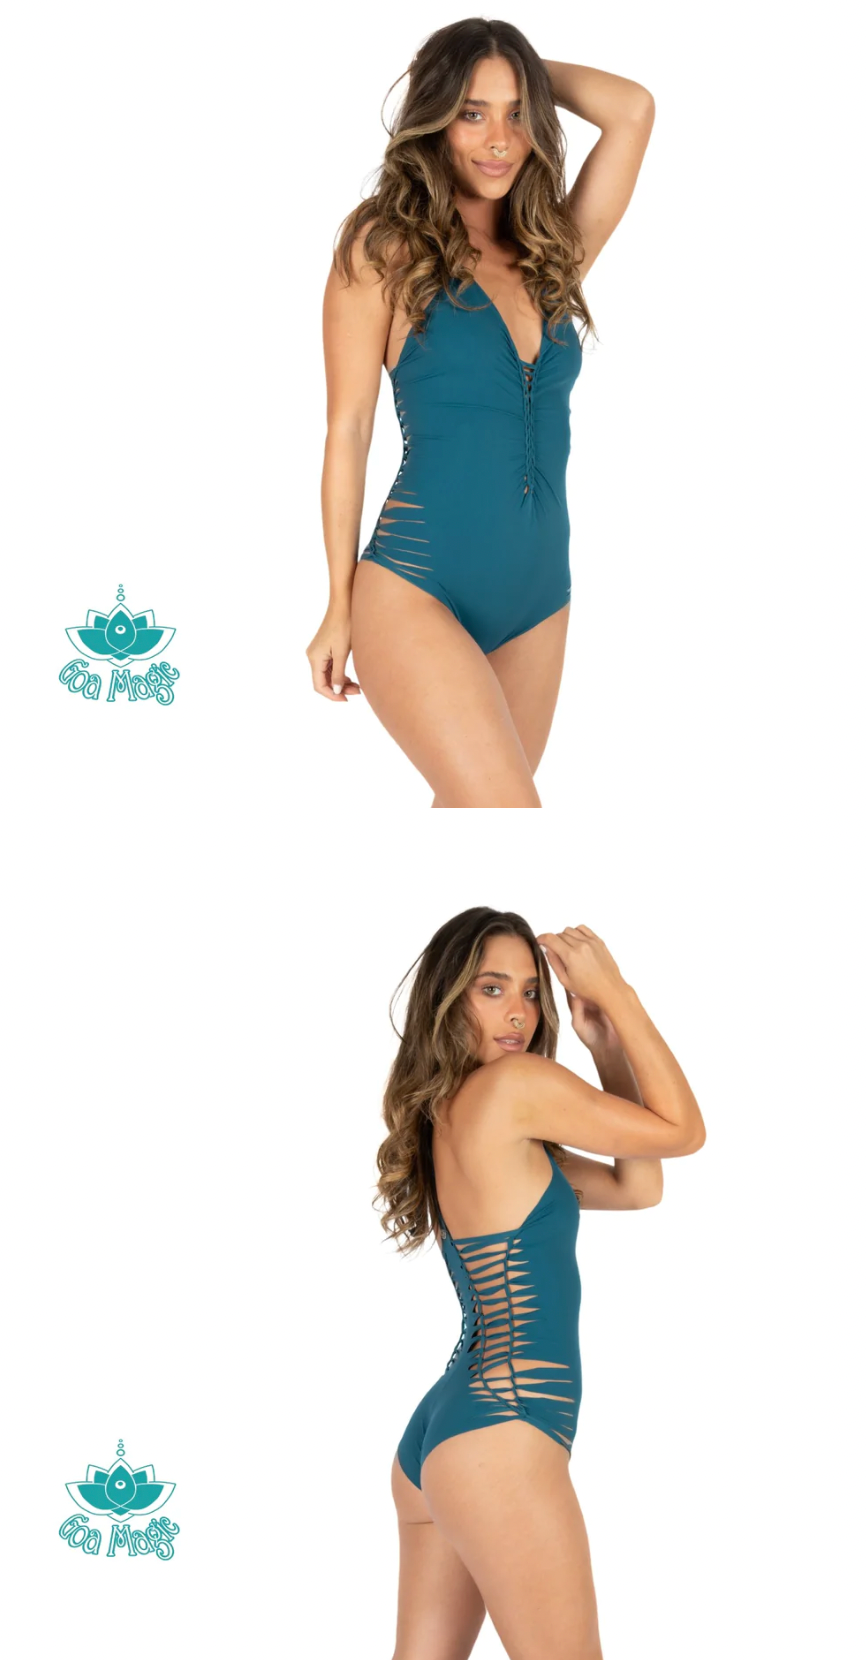 Teal One Piece Swimsuit For Women "DORIN" (Lycra Fabric)